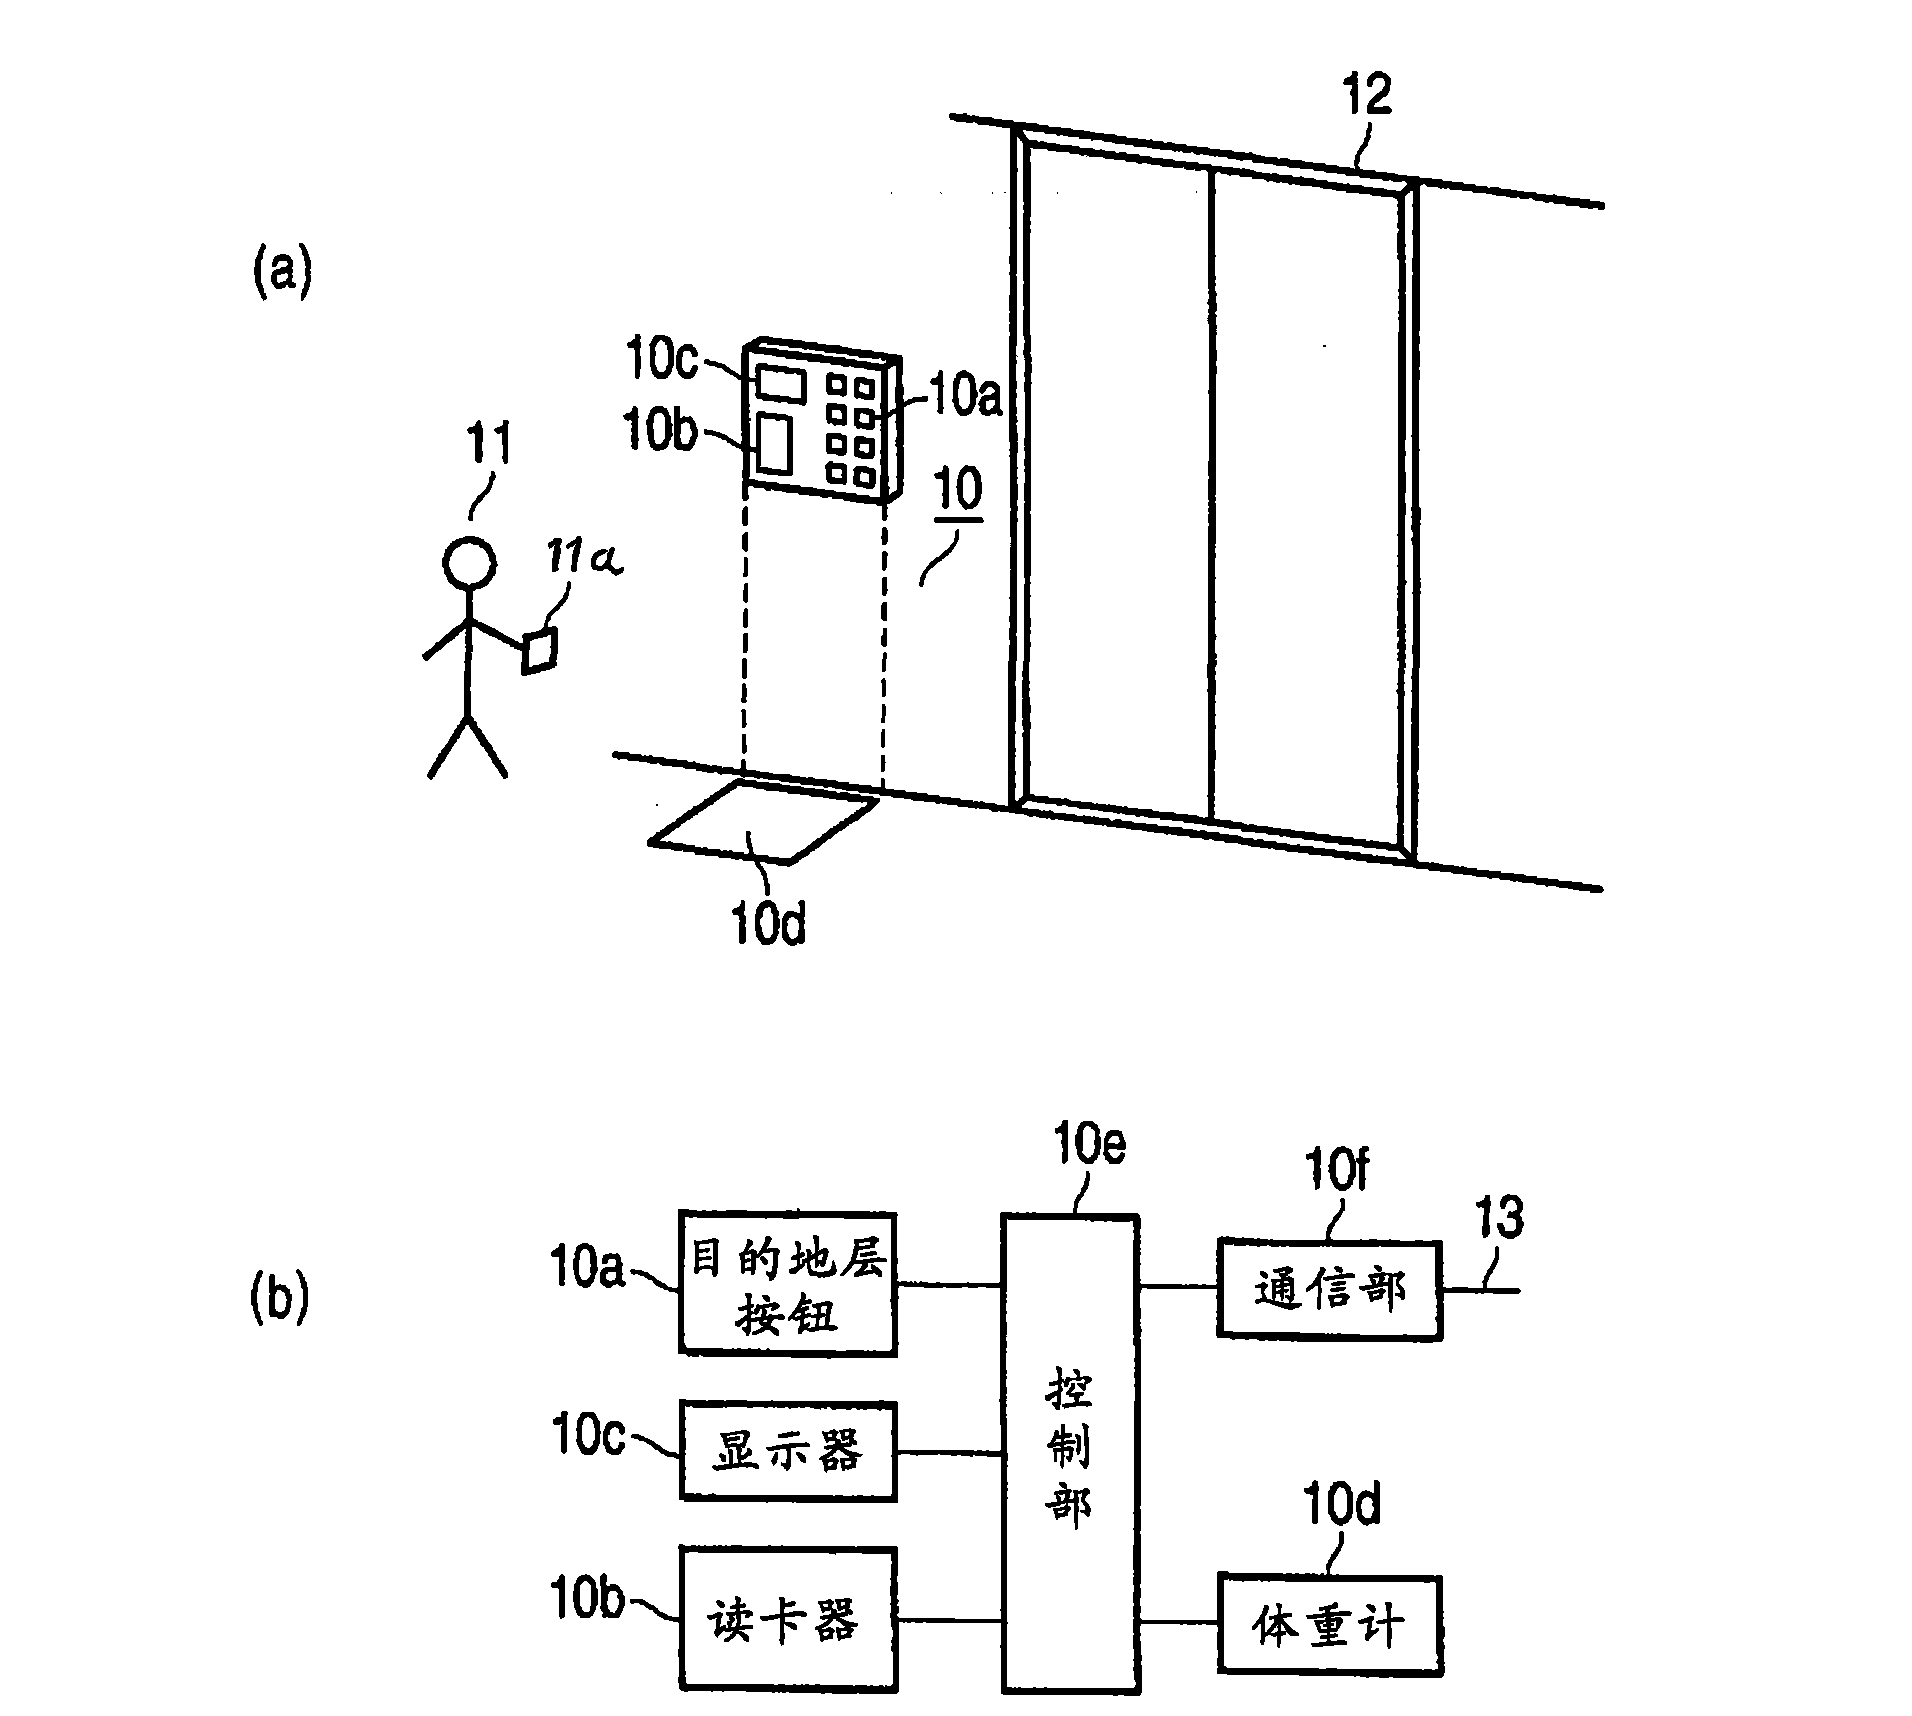 Operation controller of elevator system